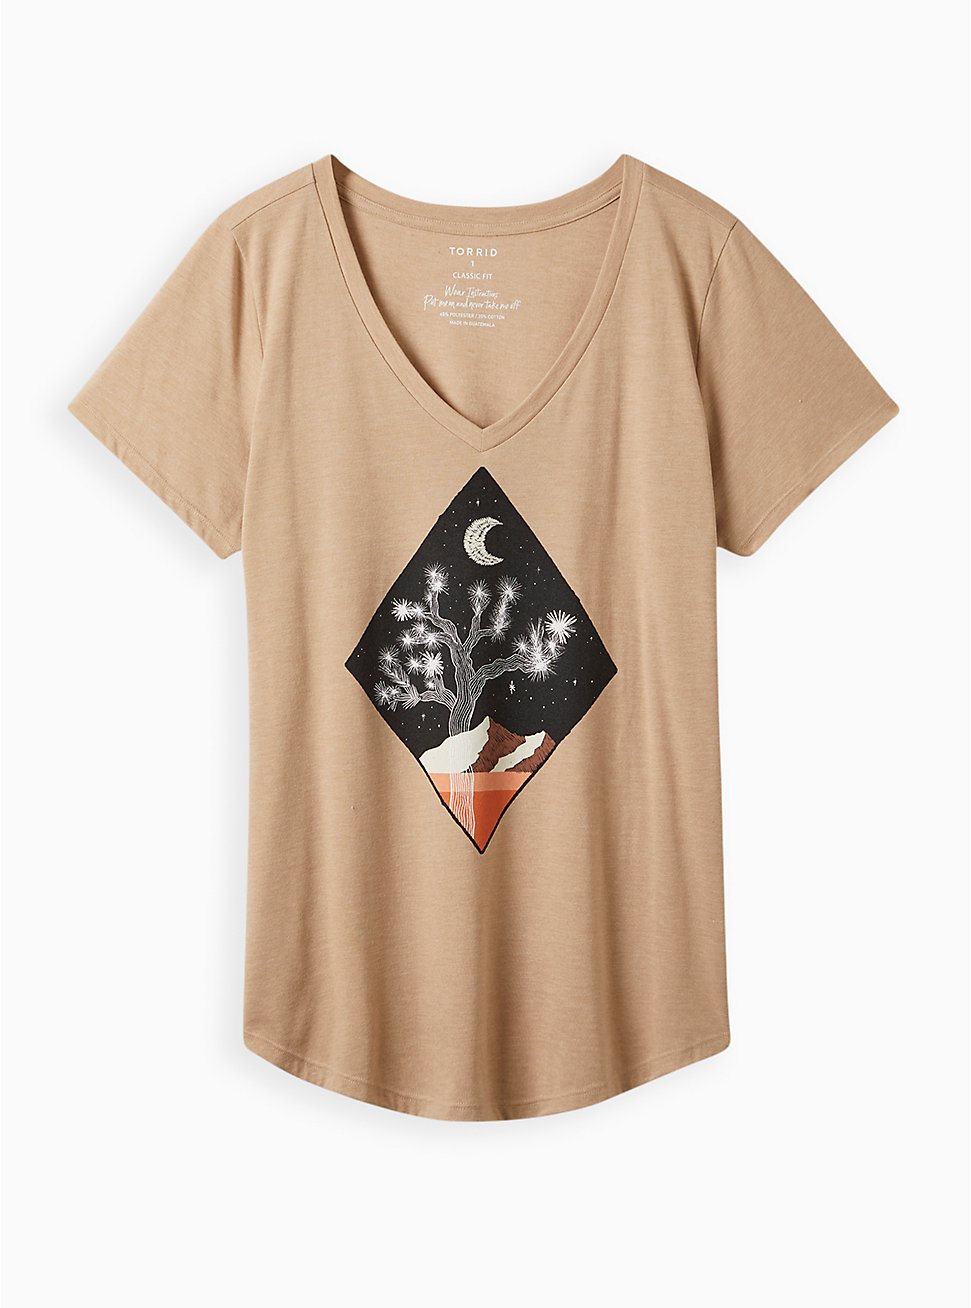 Girlfriend Tee - Signature Jersey Landscape Taupe, LIGHT TAUPE, hi-res